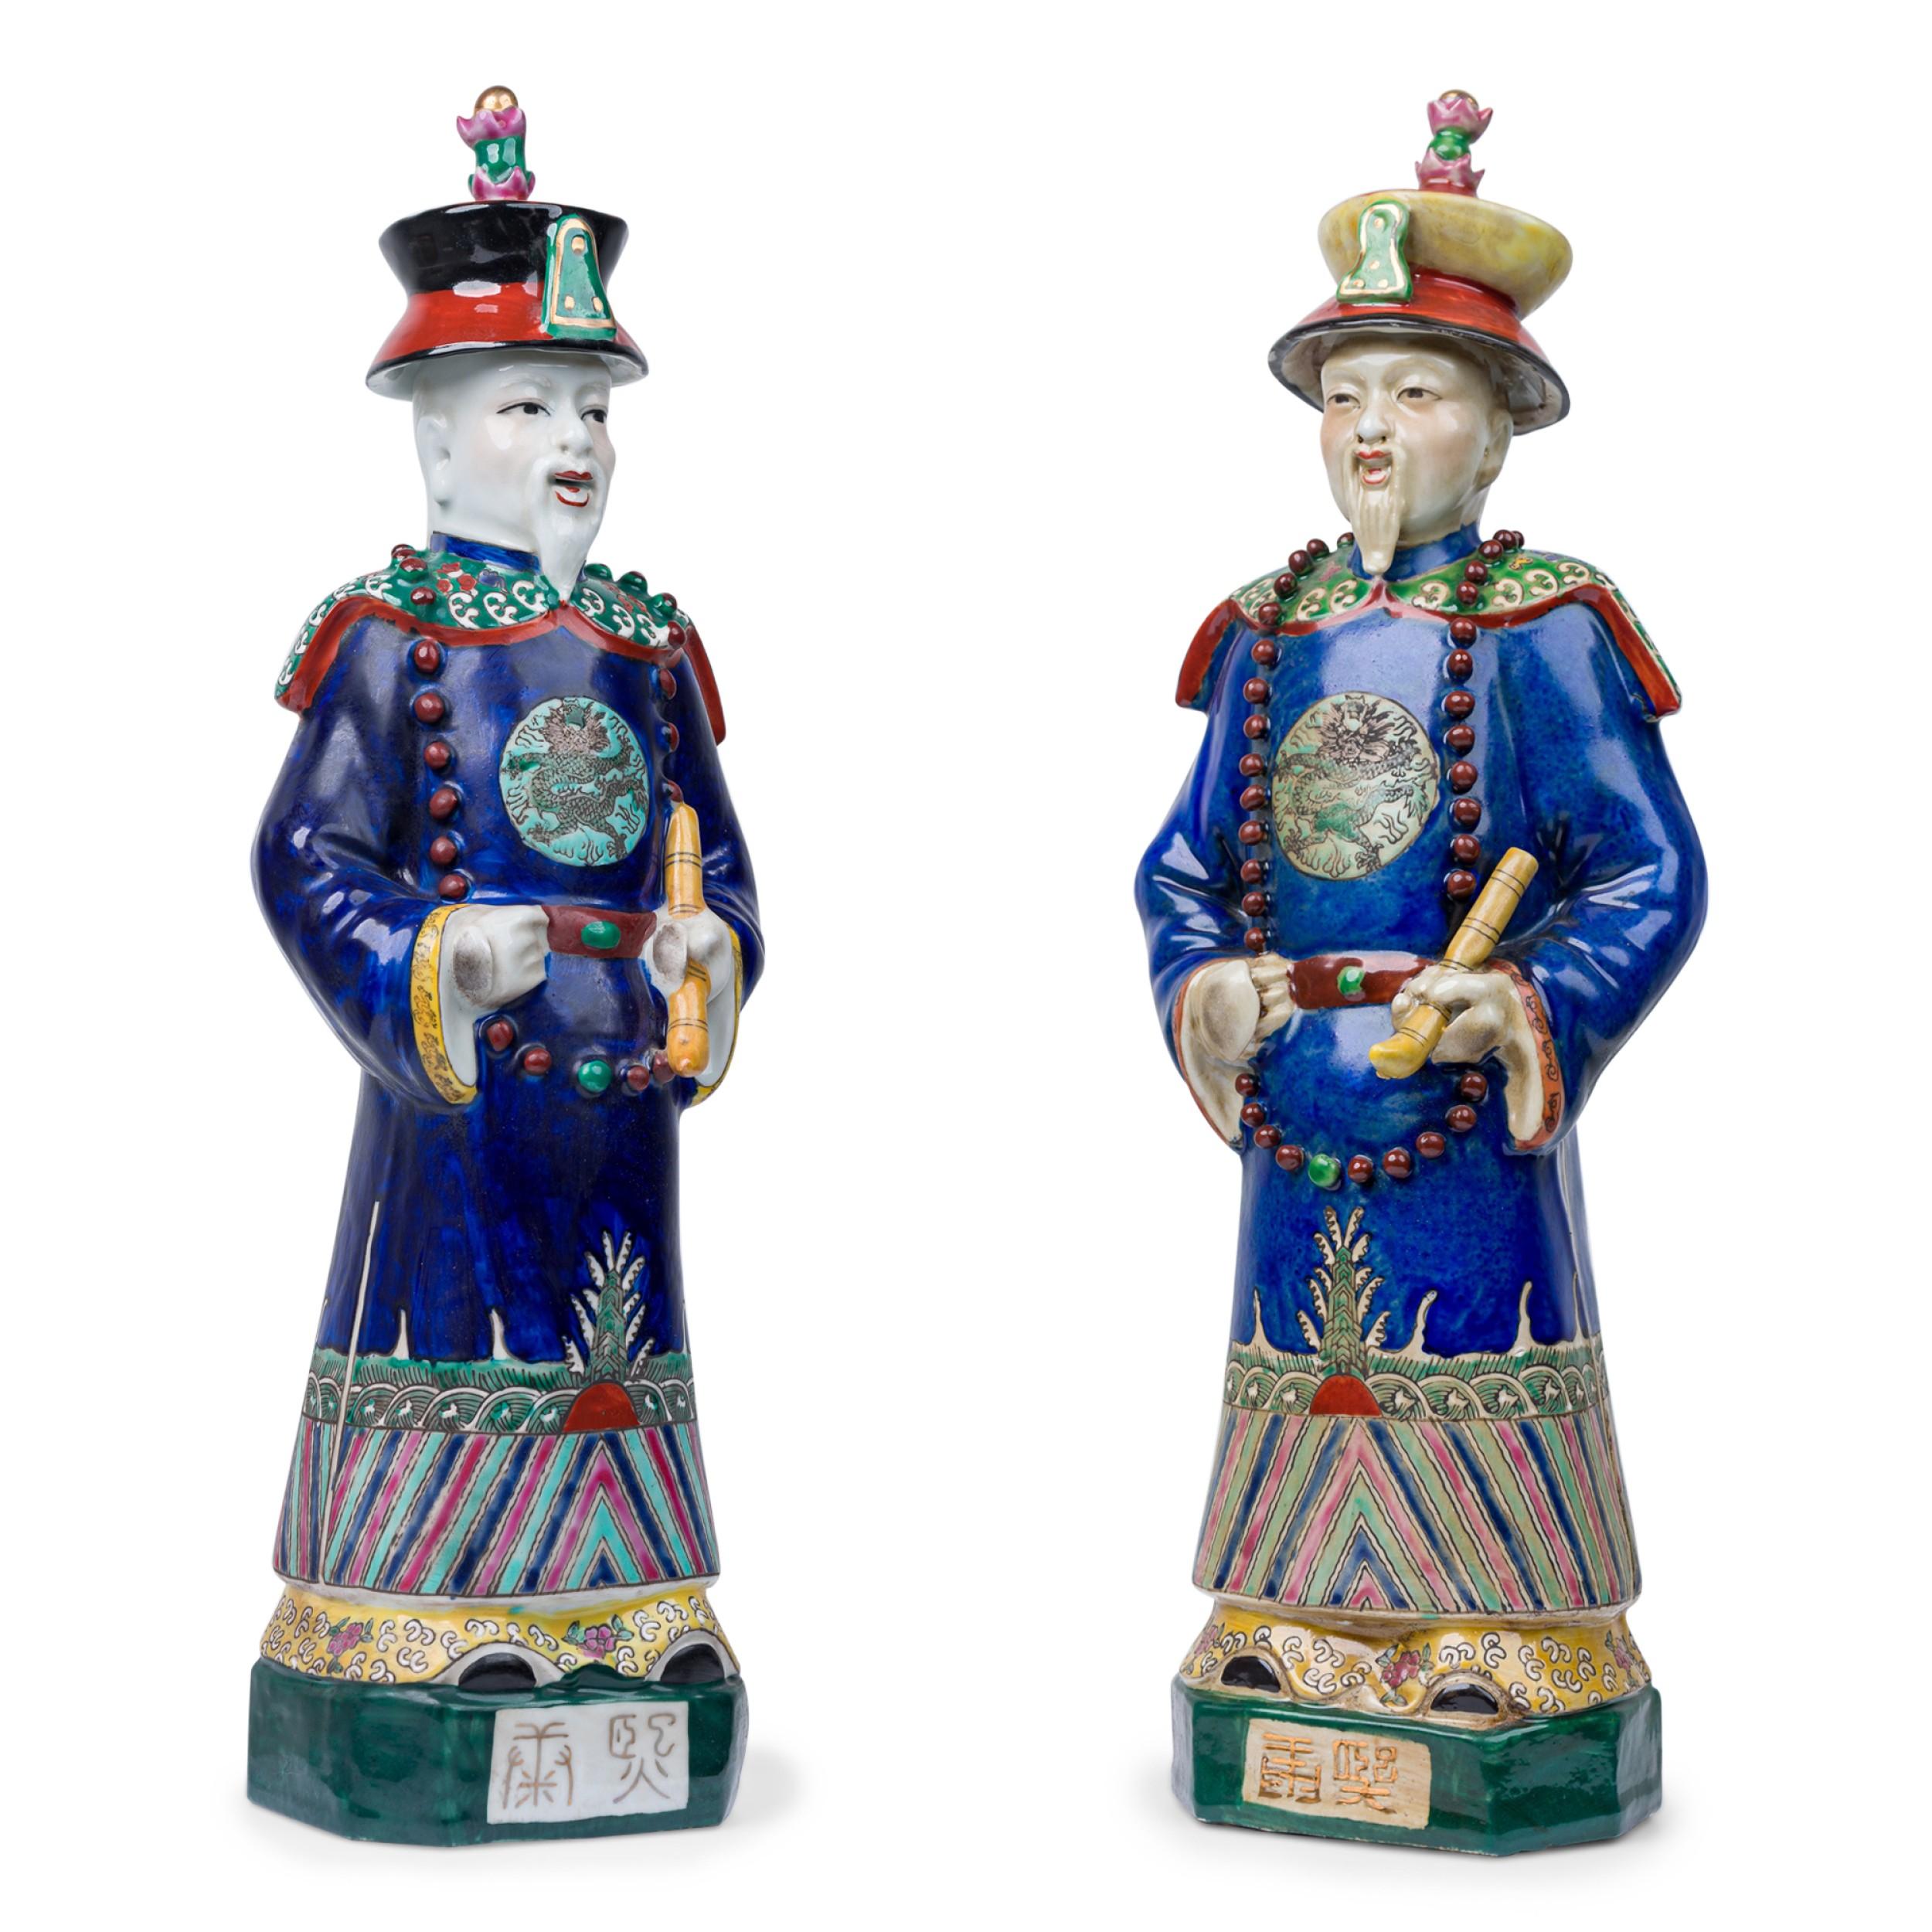 Pair of Chinese Painted Ceramic Figures Depicting a Blue Robed Emperor For Sale 3